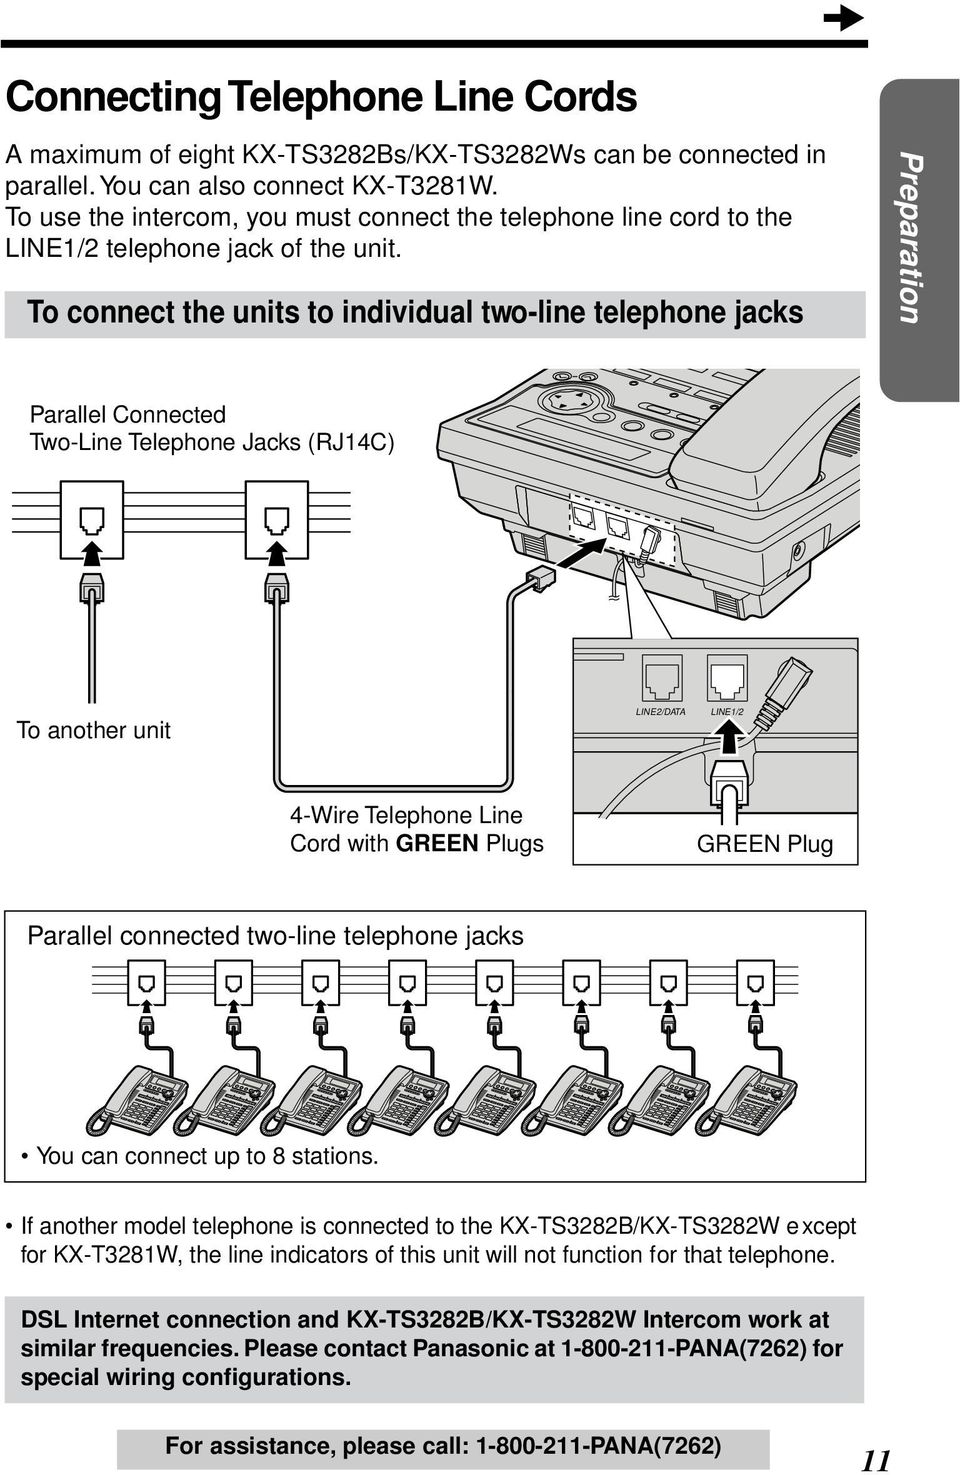 To connect the units to individual two-line telephone jacks Preparation Parallel Connected Two-Line Telephone Jacks (RJ4C) To another unit LINE/DATA LINE/ 4-Wire Telephone Line Cord with GREEN Plugs